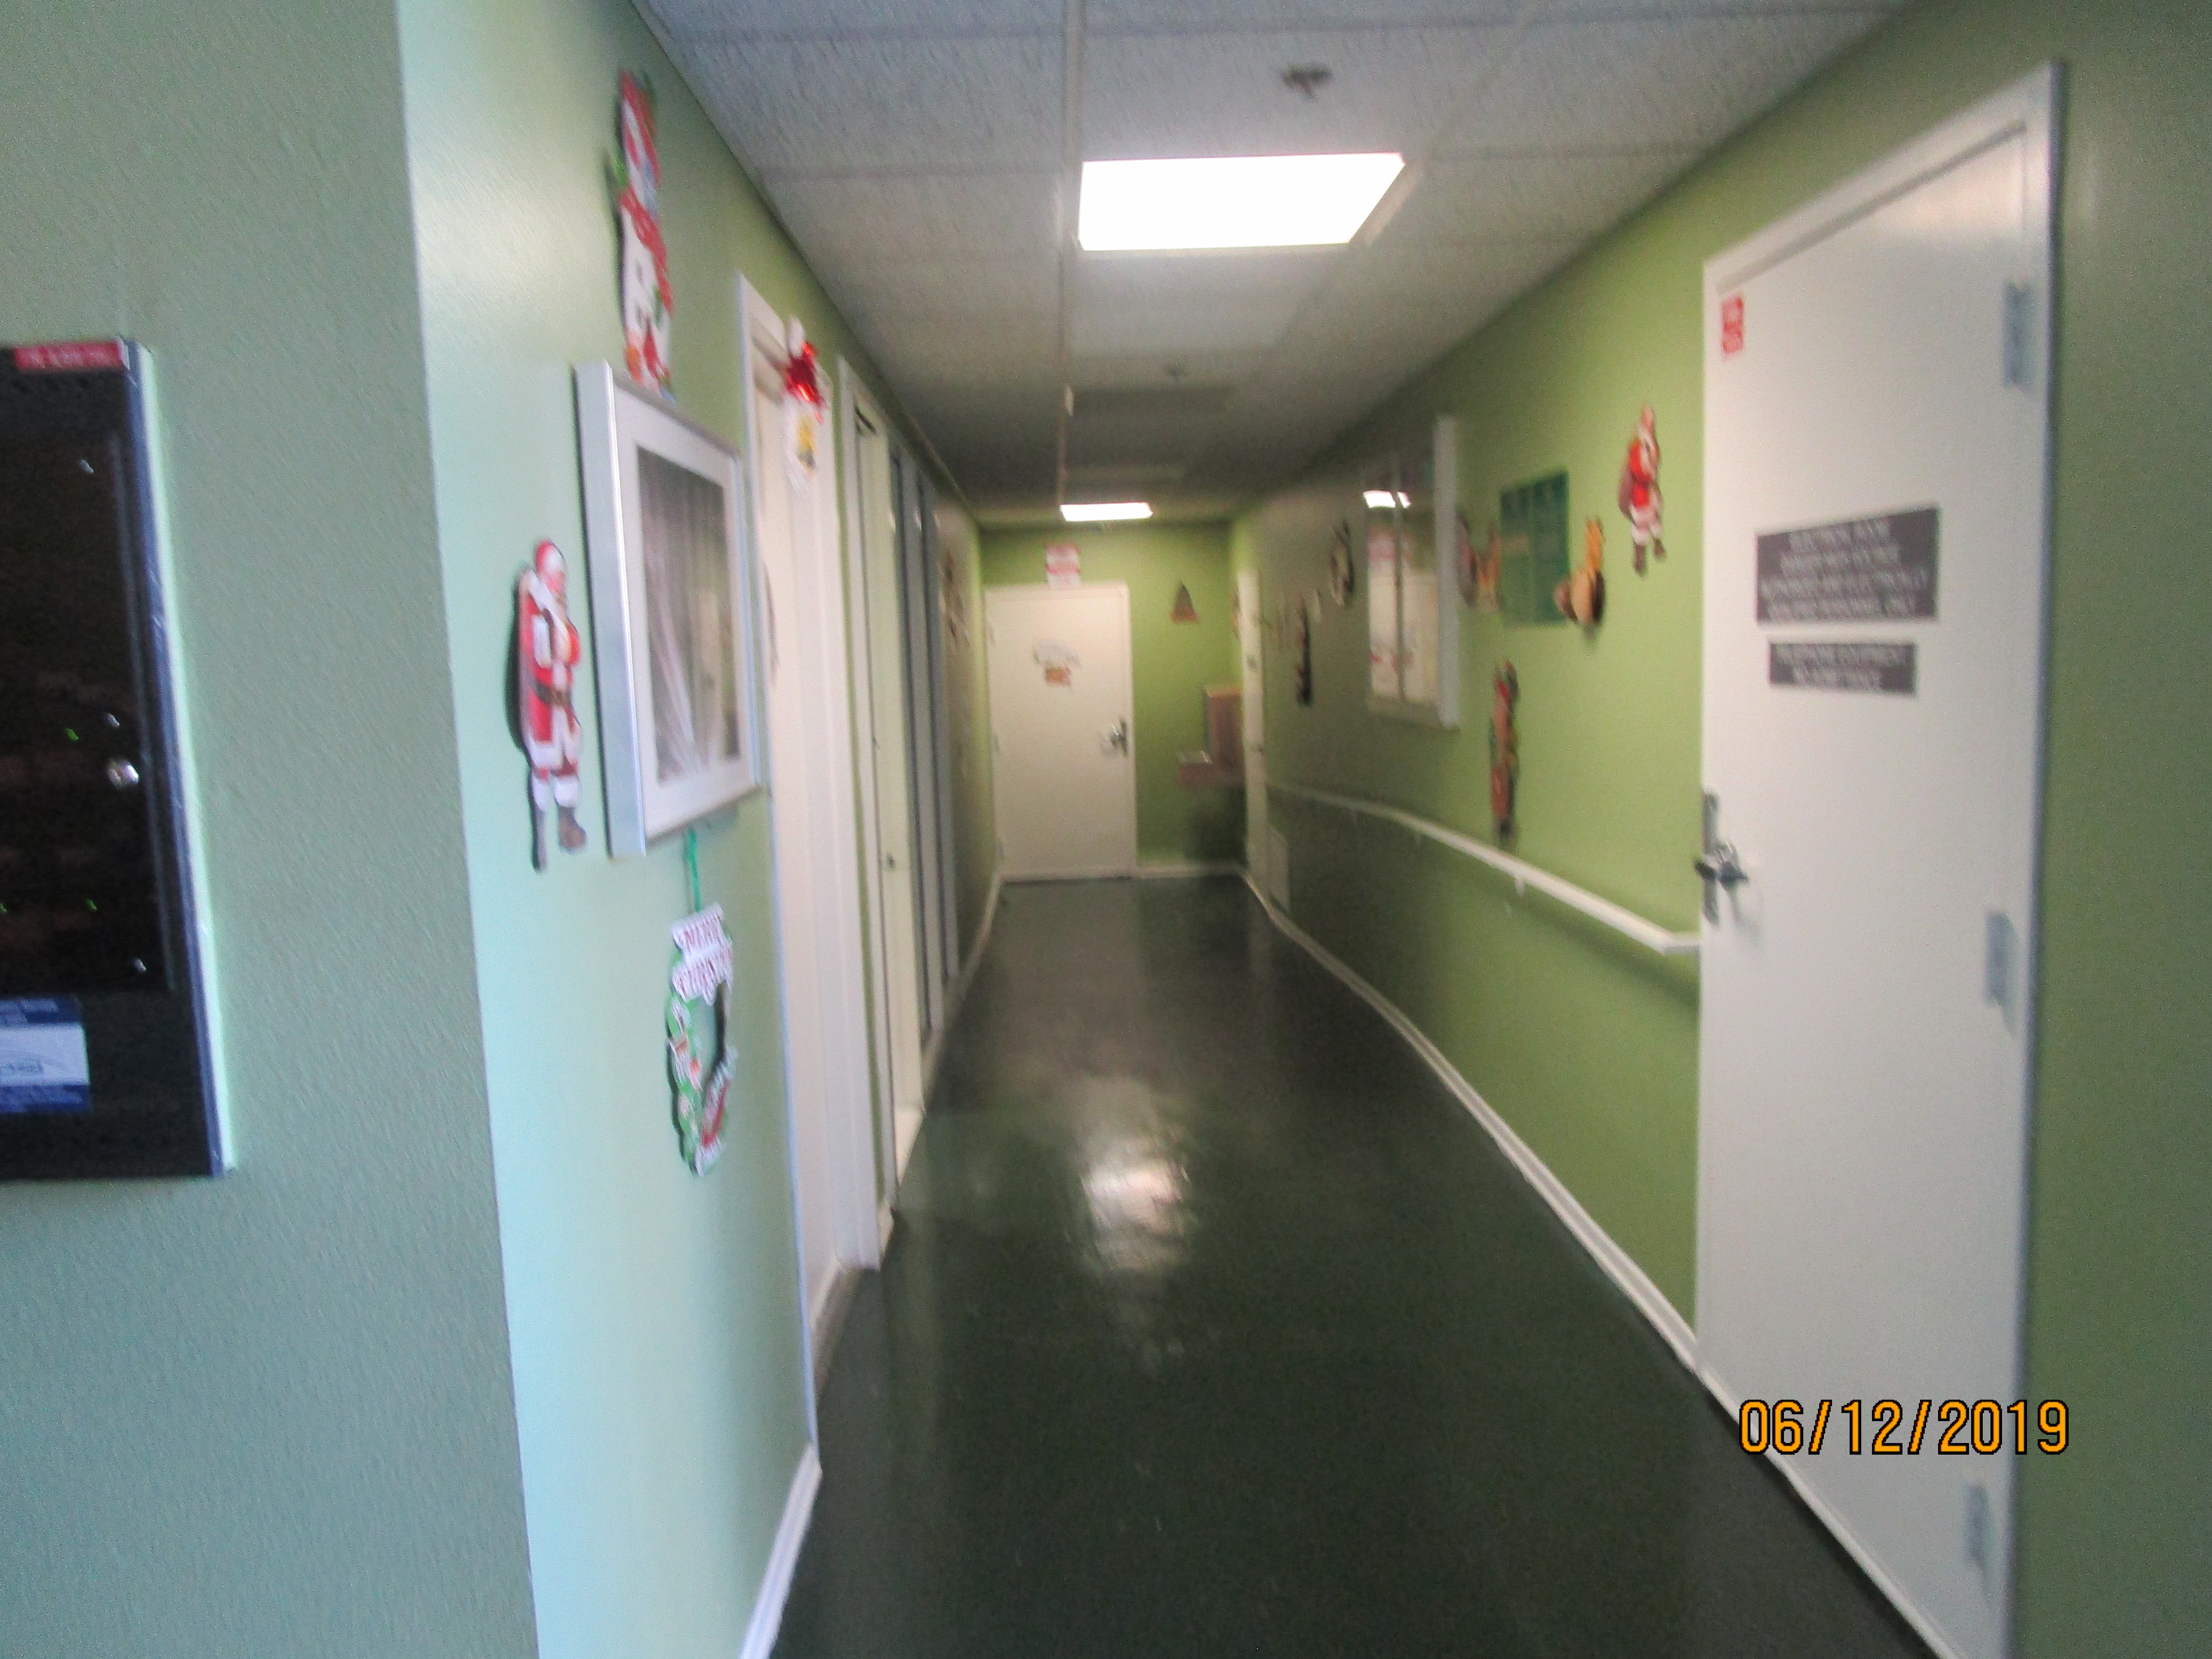 View of a hall, green linoleum floors, light green walls, handrails on the right side wall, Christmas decorations all over.